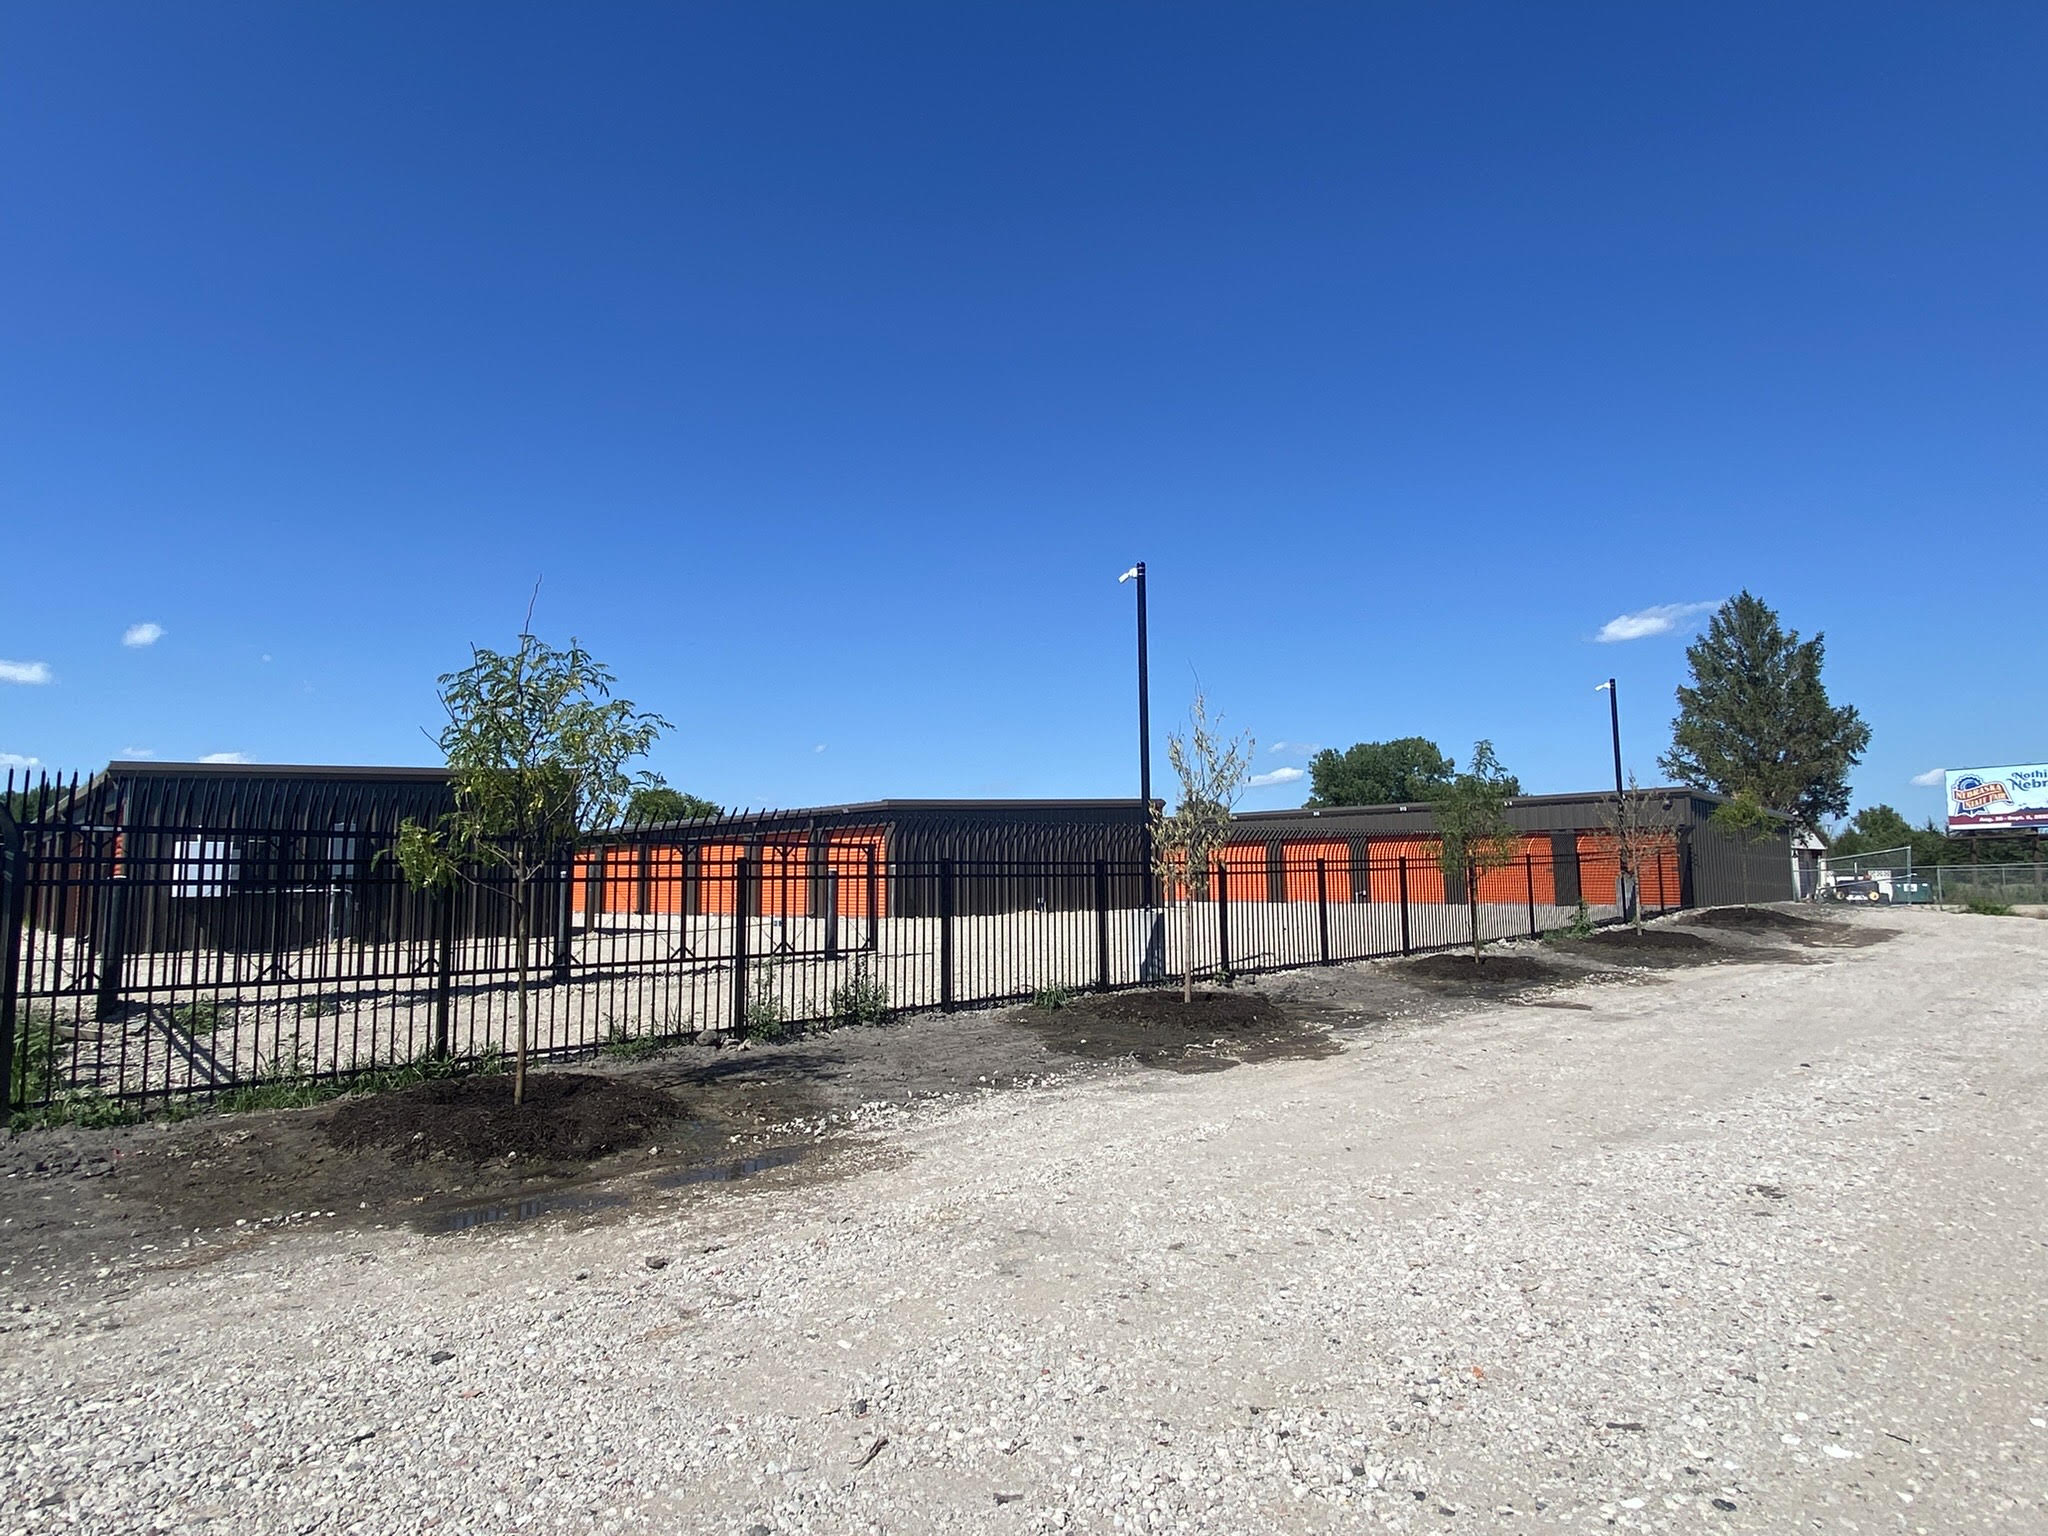 View through the back fence of the self storage facility in Grand Island, Nebraska